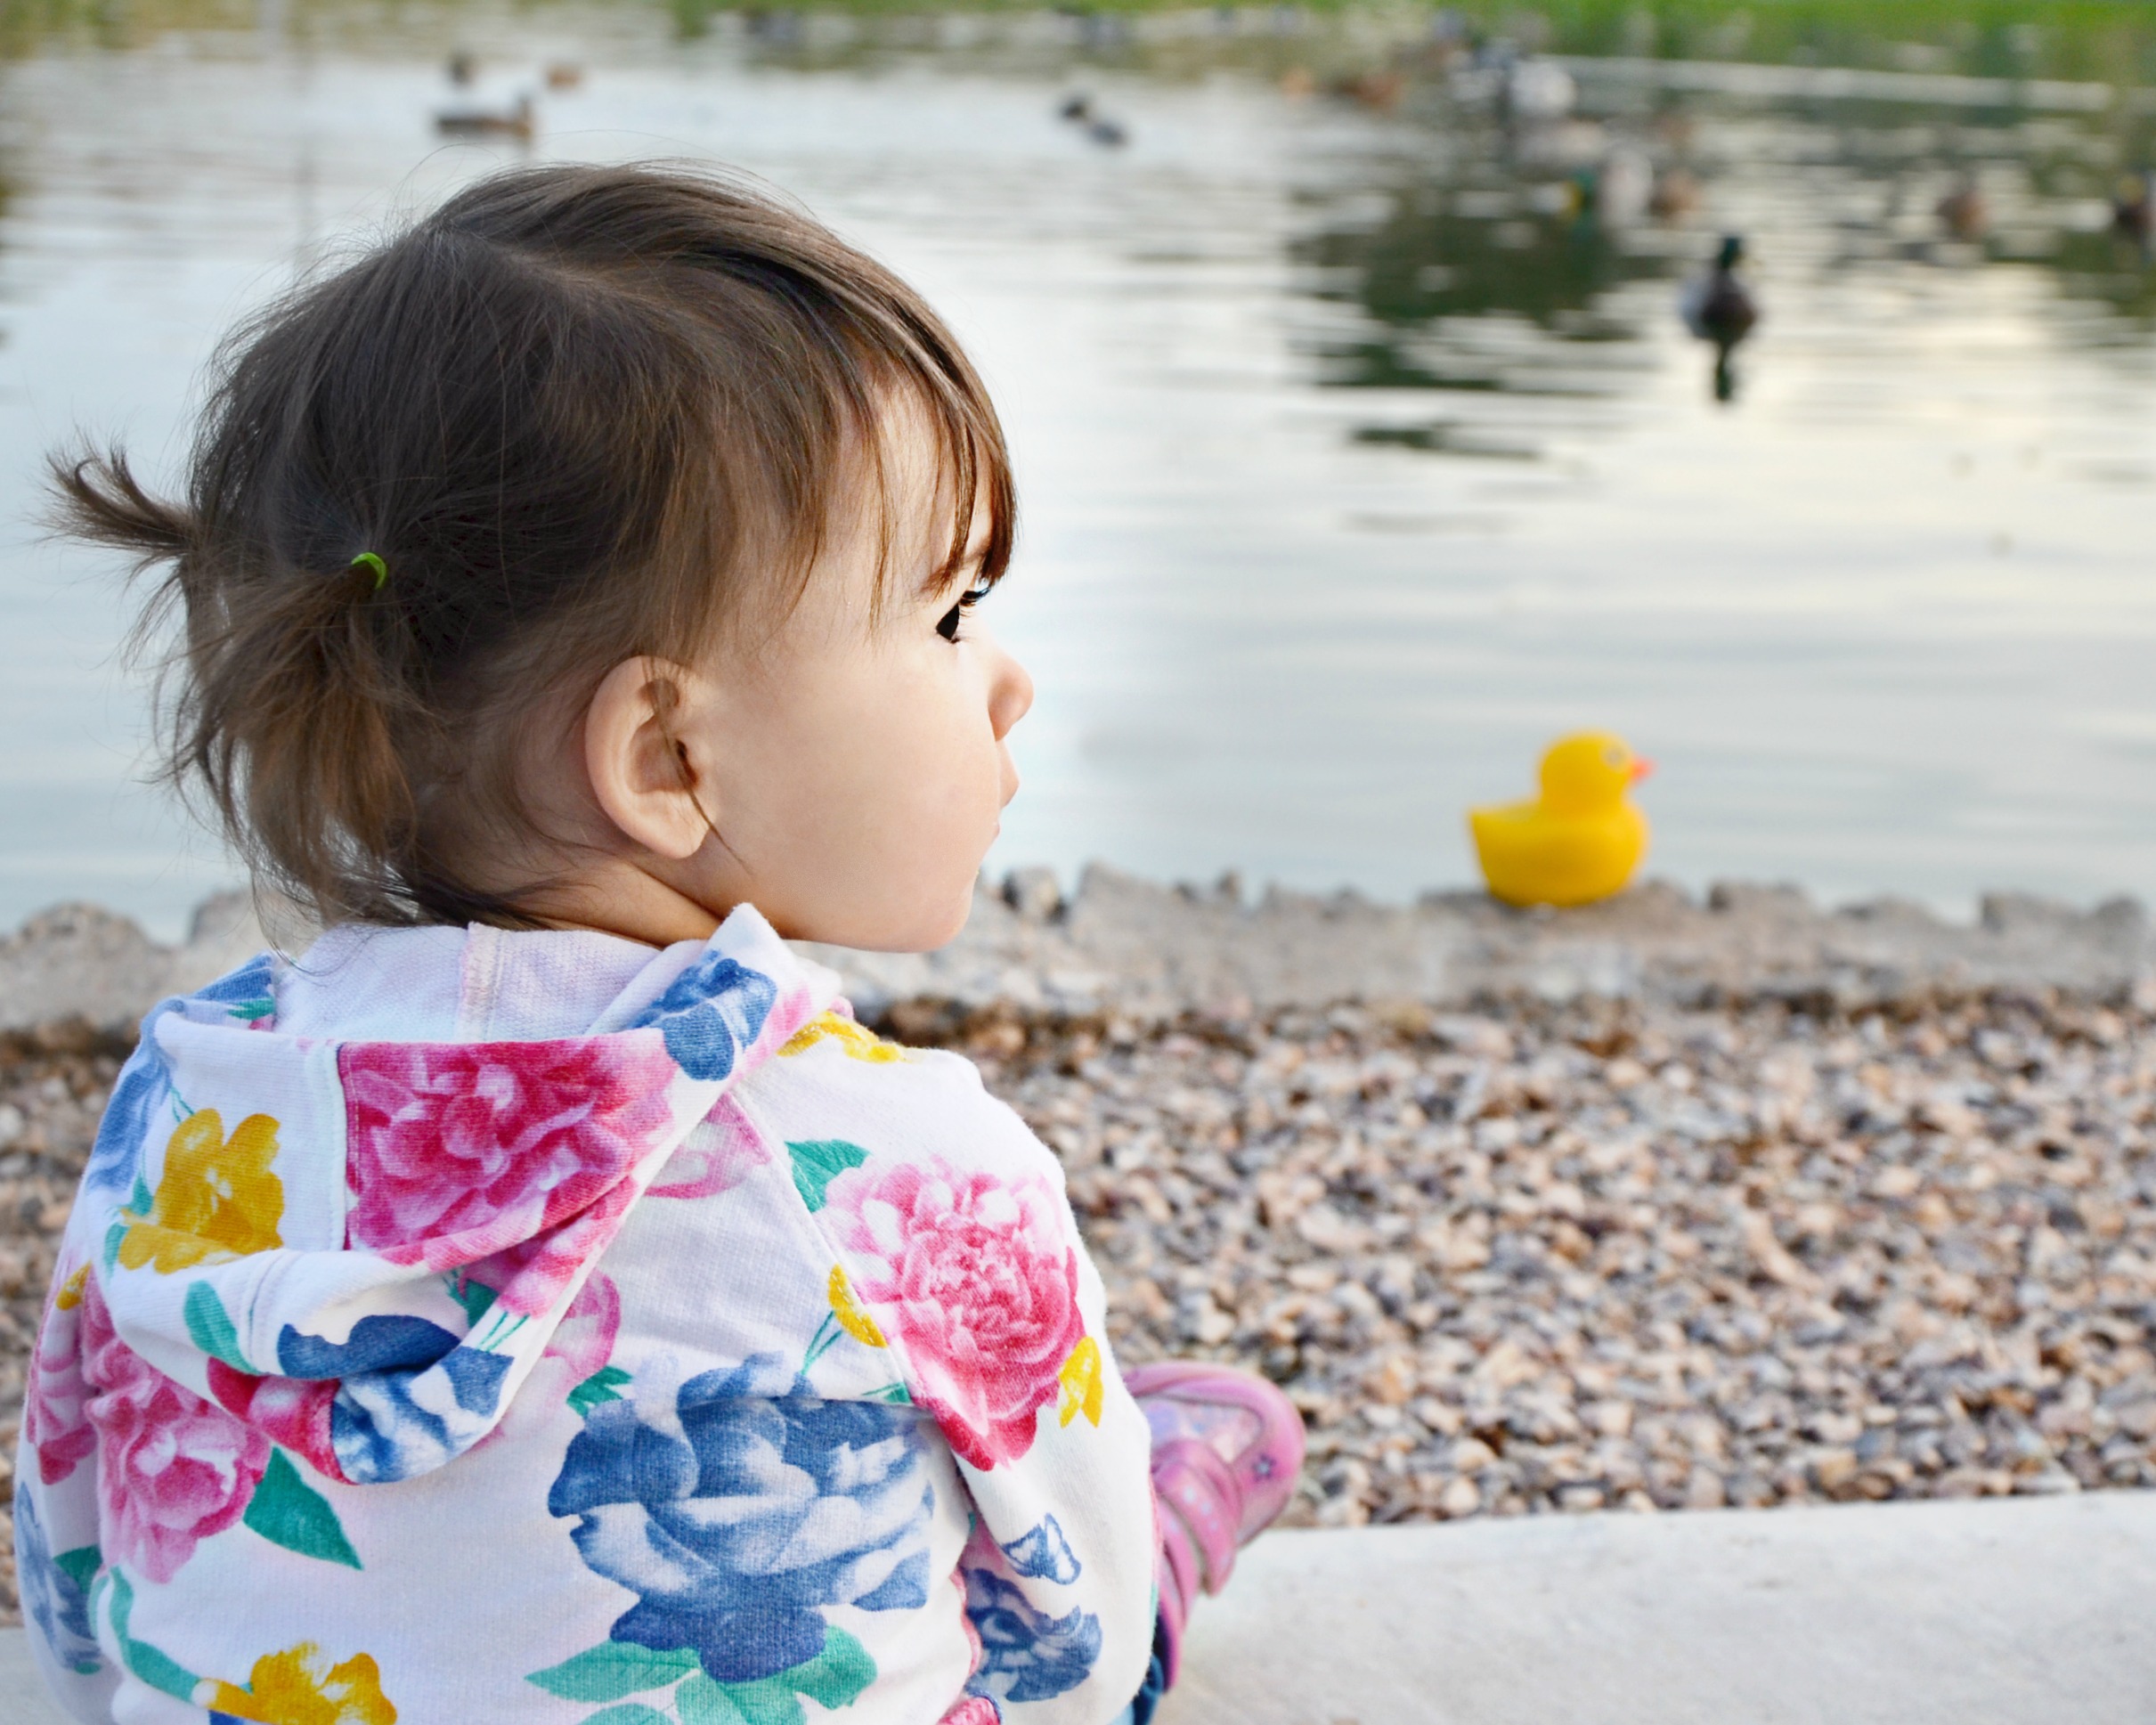 Edwin the Duck and baby at lake